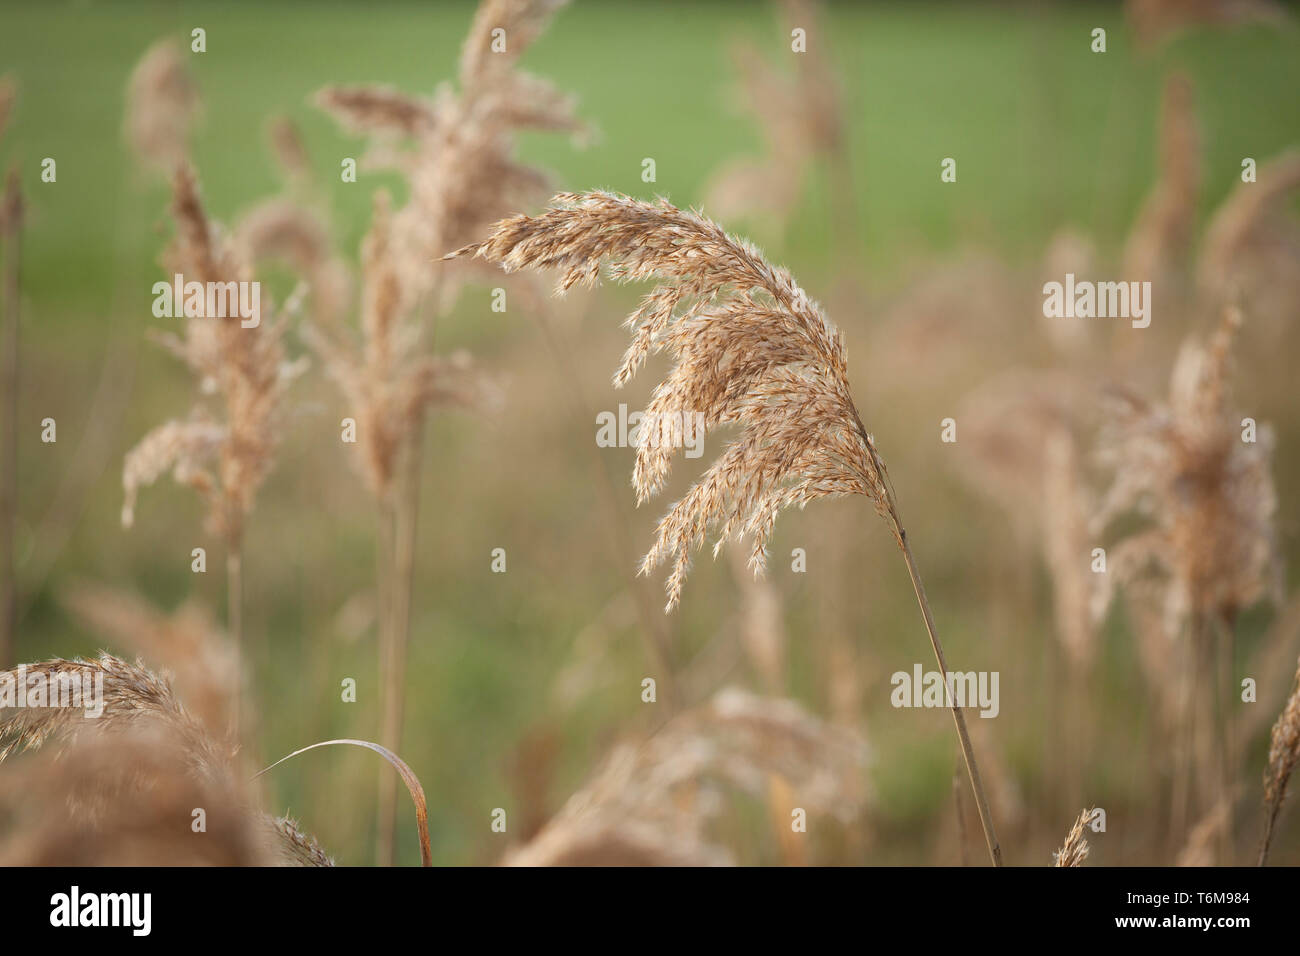 The seed head of the Common or Tall Reed  (Phragmites australis). Stock Photo